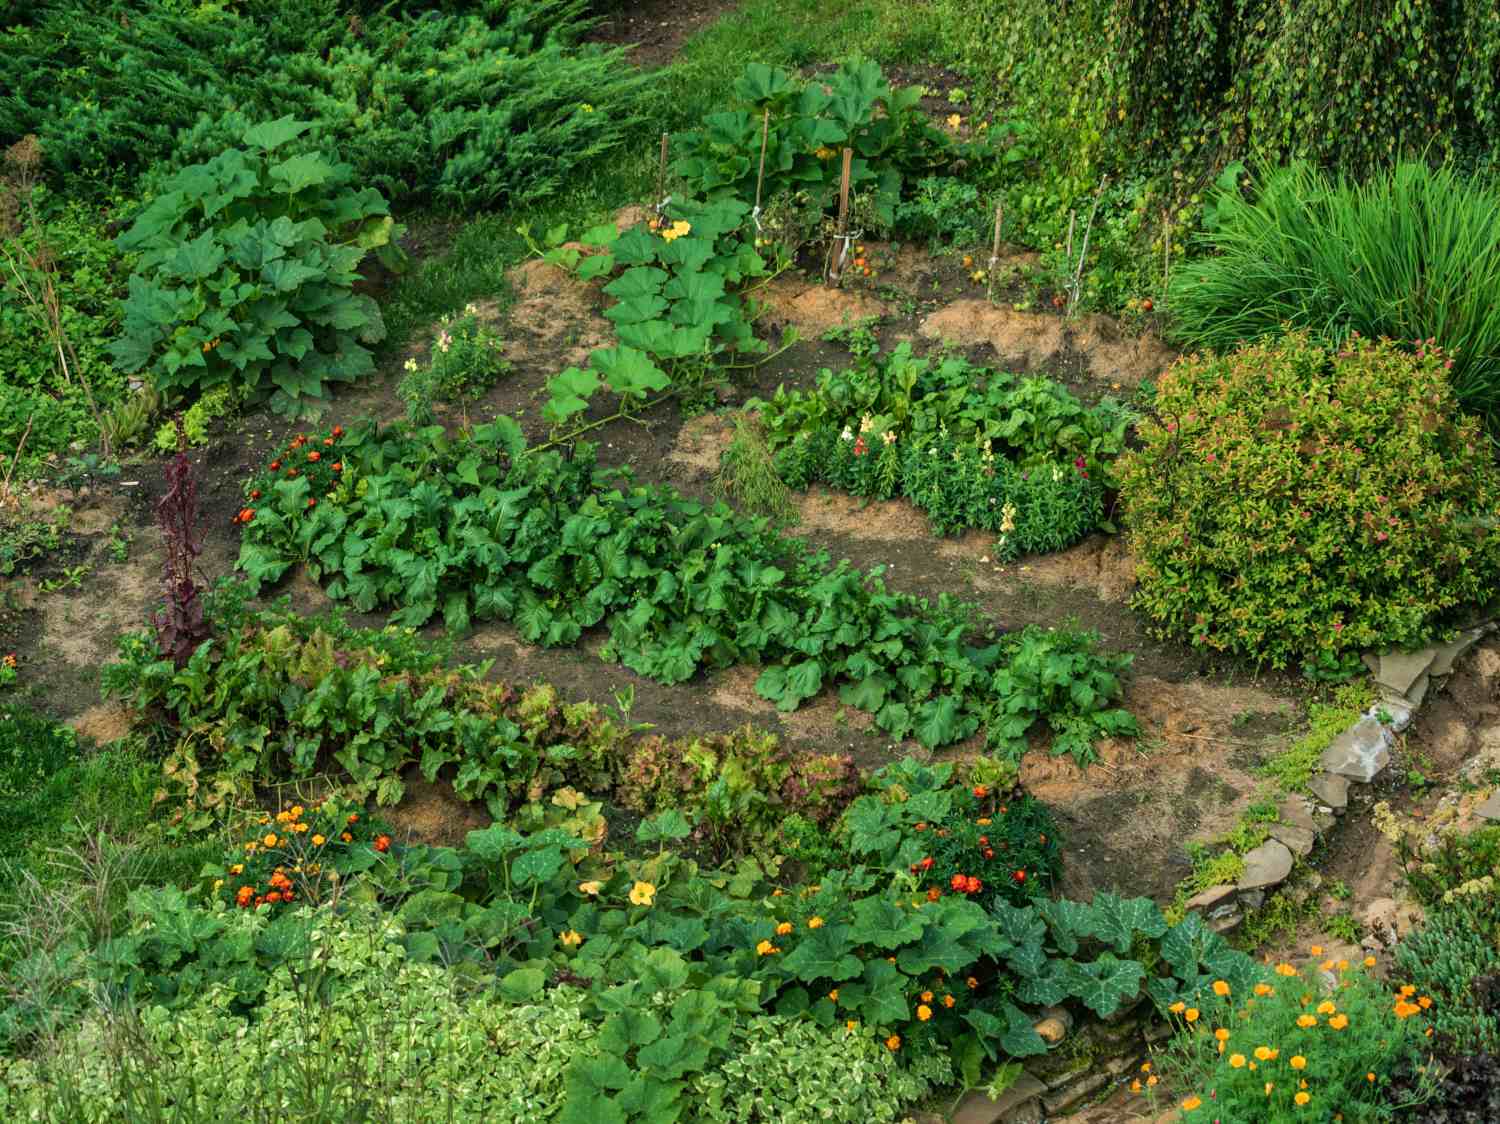 Biodiversity leads to a self-sustaining permaculture garden